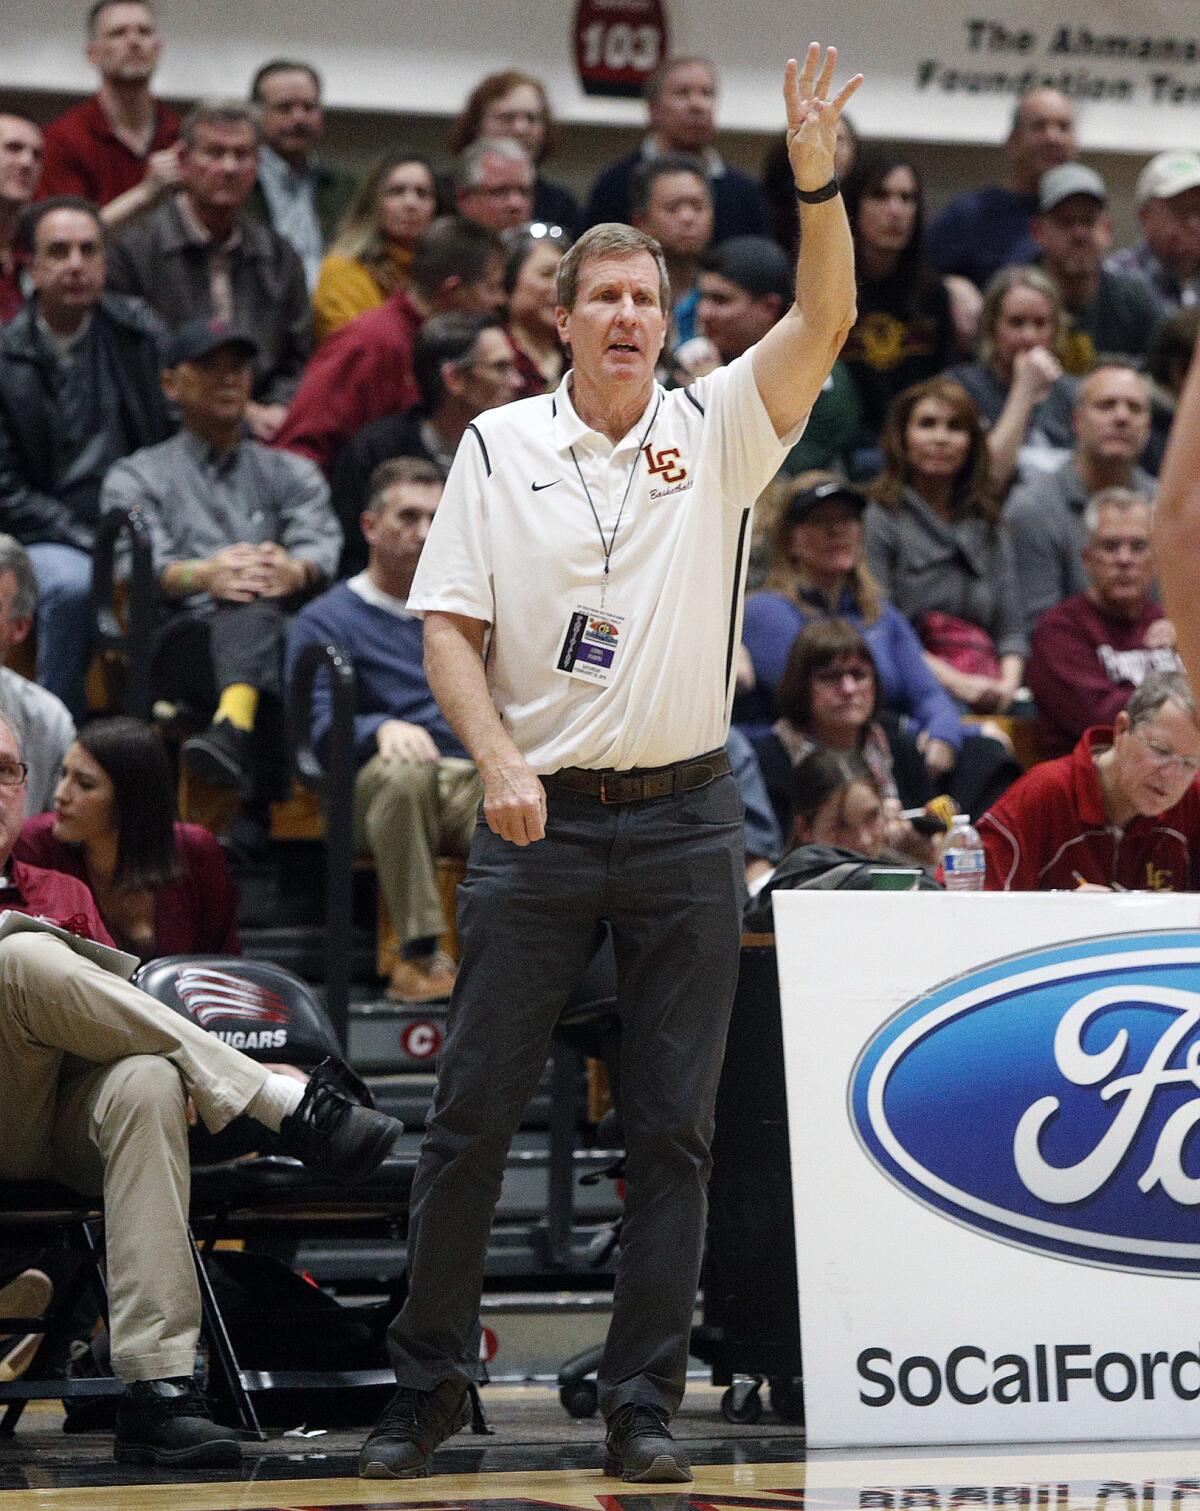 La Canada's head coach Tom Hofman calls in a play during the game against Colony in the CIF Southern Section Division II-A championship game at Azusa Pacific University on Saturday, February 23, 2019. La Canada lost the game 50-47.